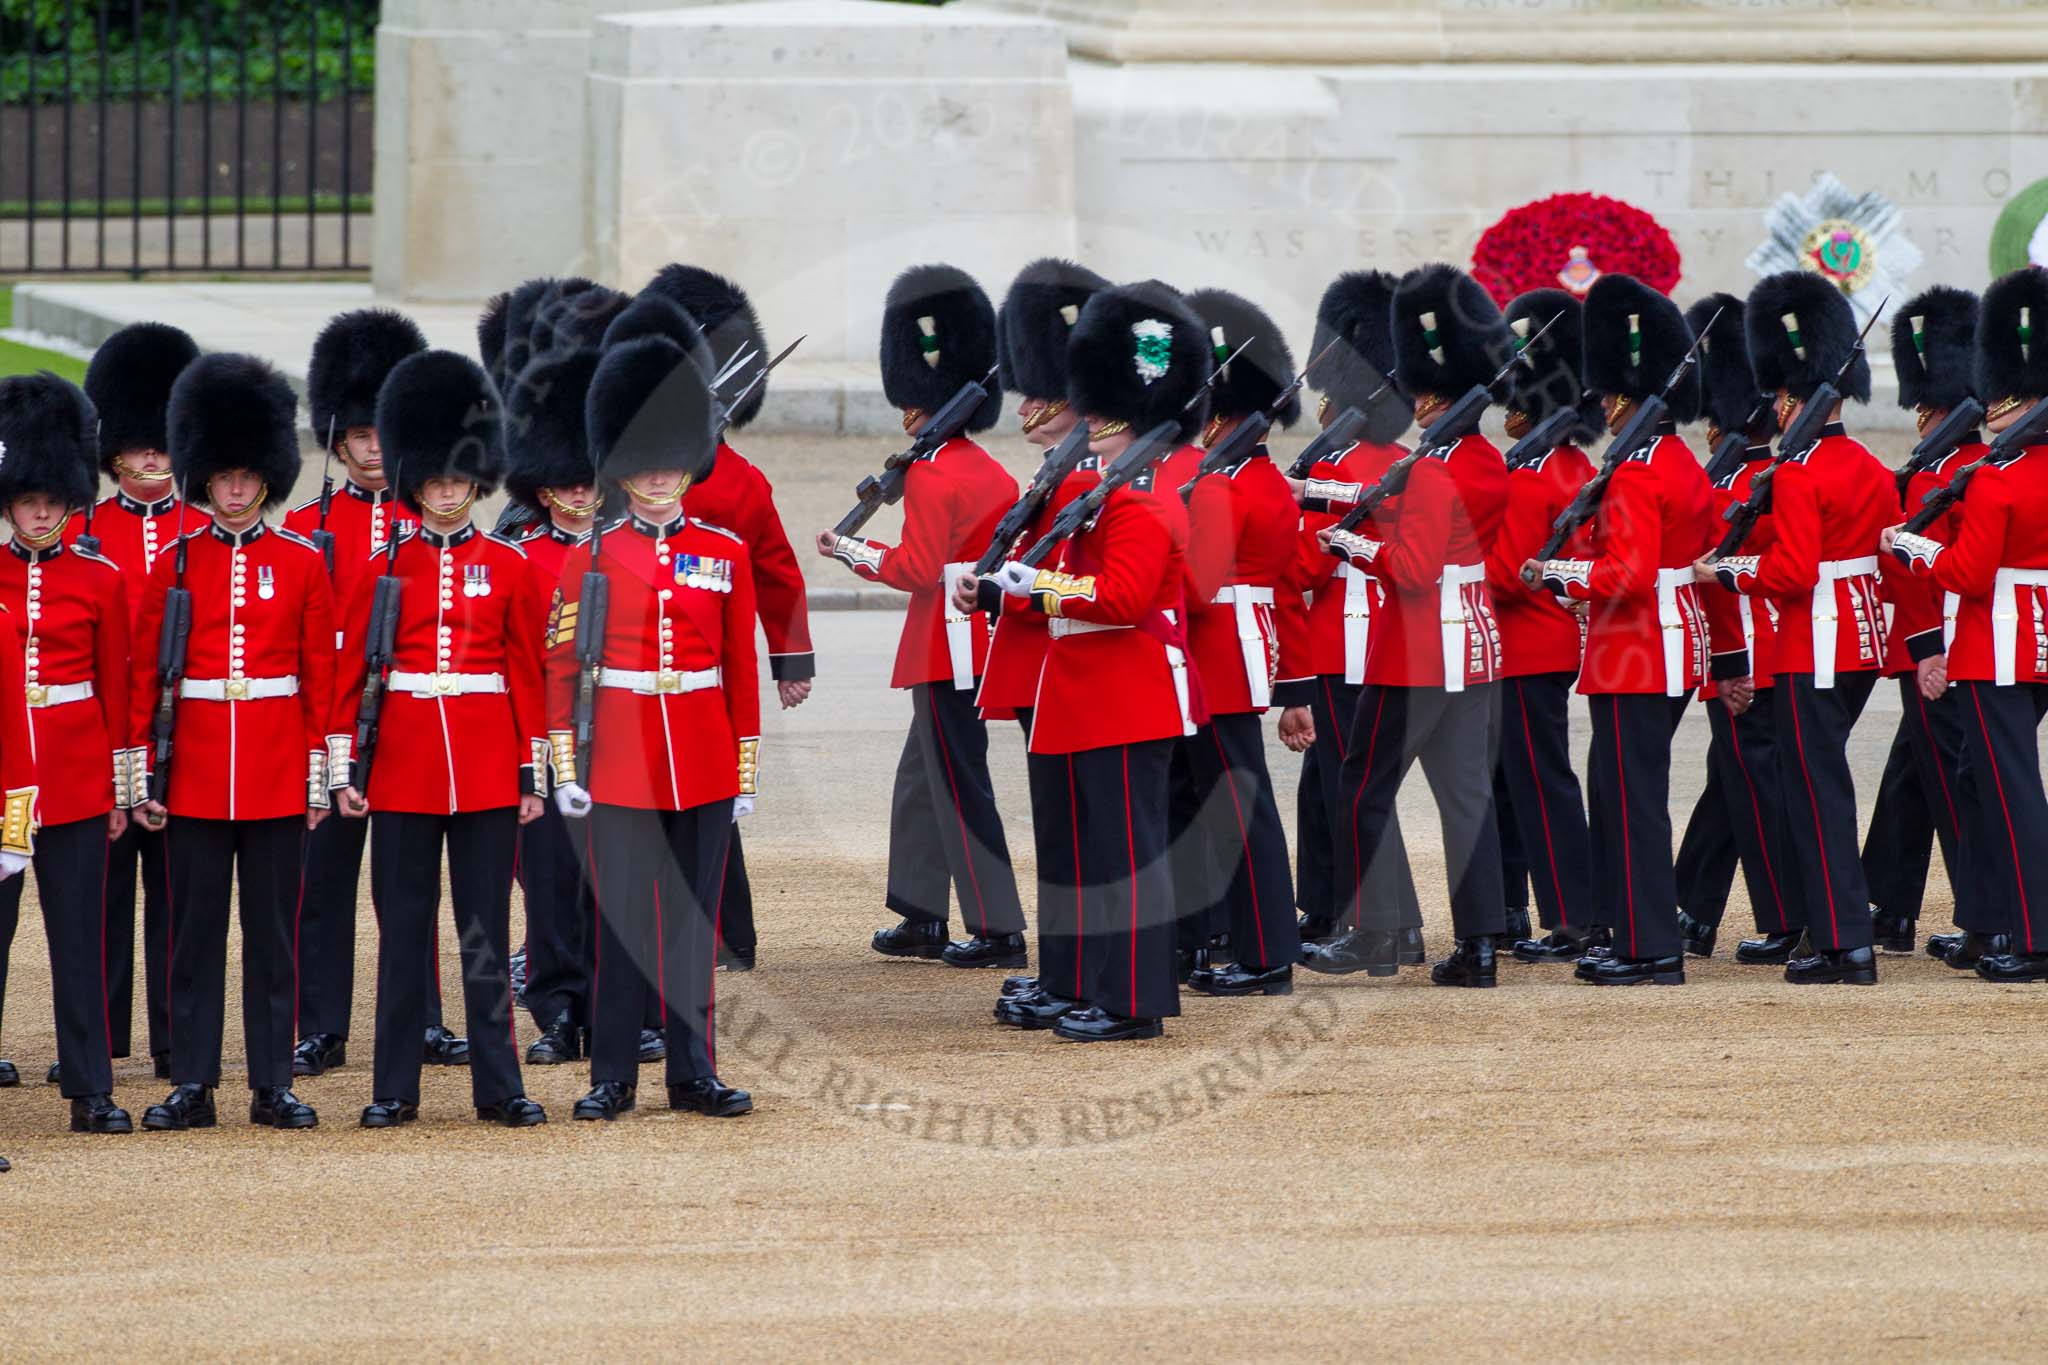 Major General's Review 2013: No. 3 Guard, 1st Battalion Welsh Guards, is opening a gap in the line for members of the Royal Family to arrive..
Horse Guards Parade, Westminster,
London SW1,

United Kingdom,
on 01 June 2013 at 10:43, image #183